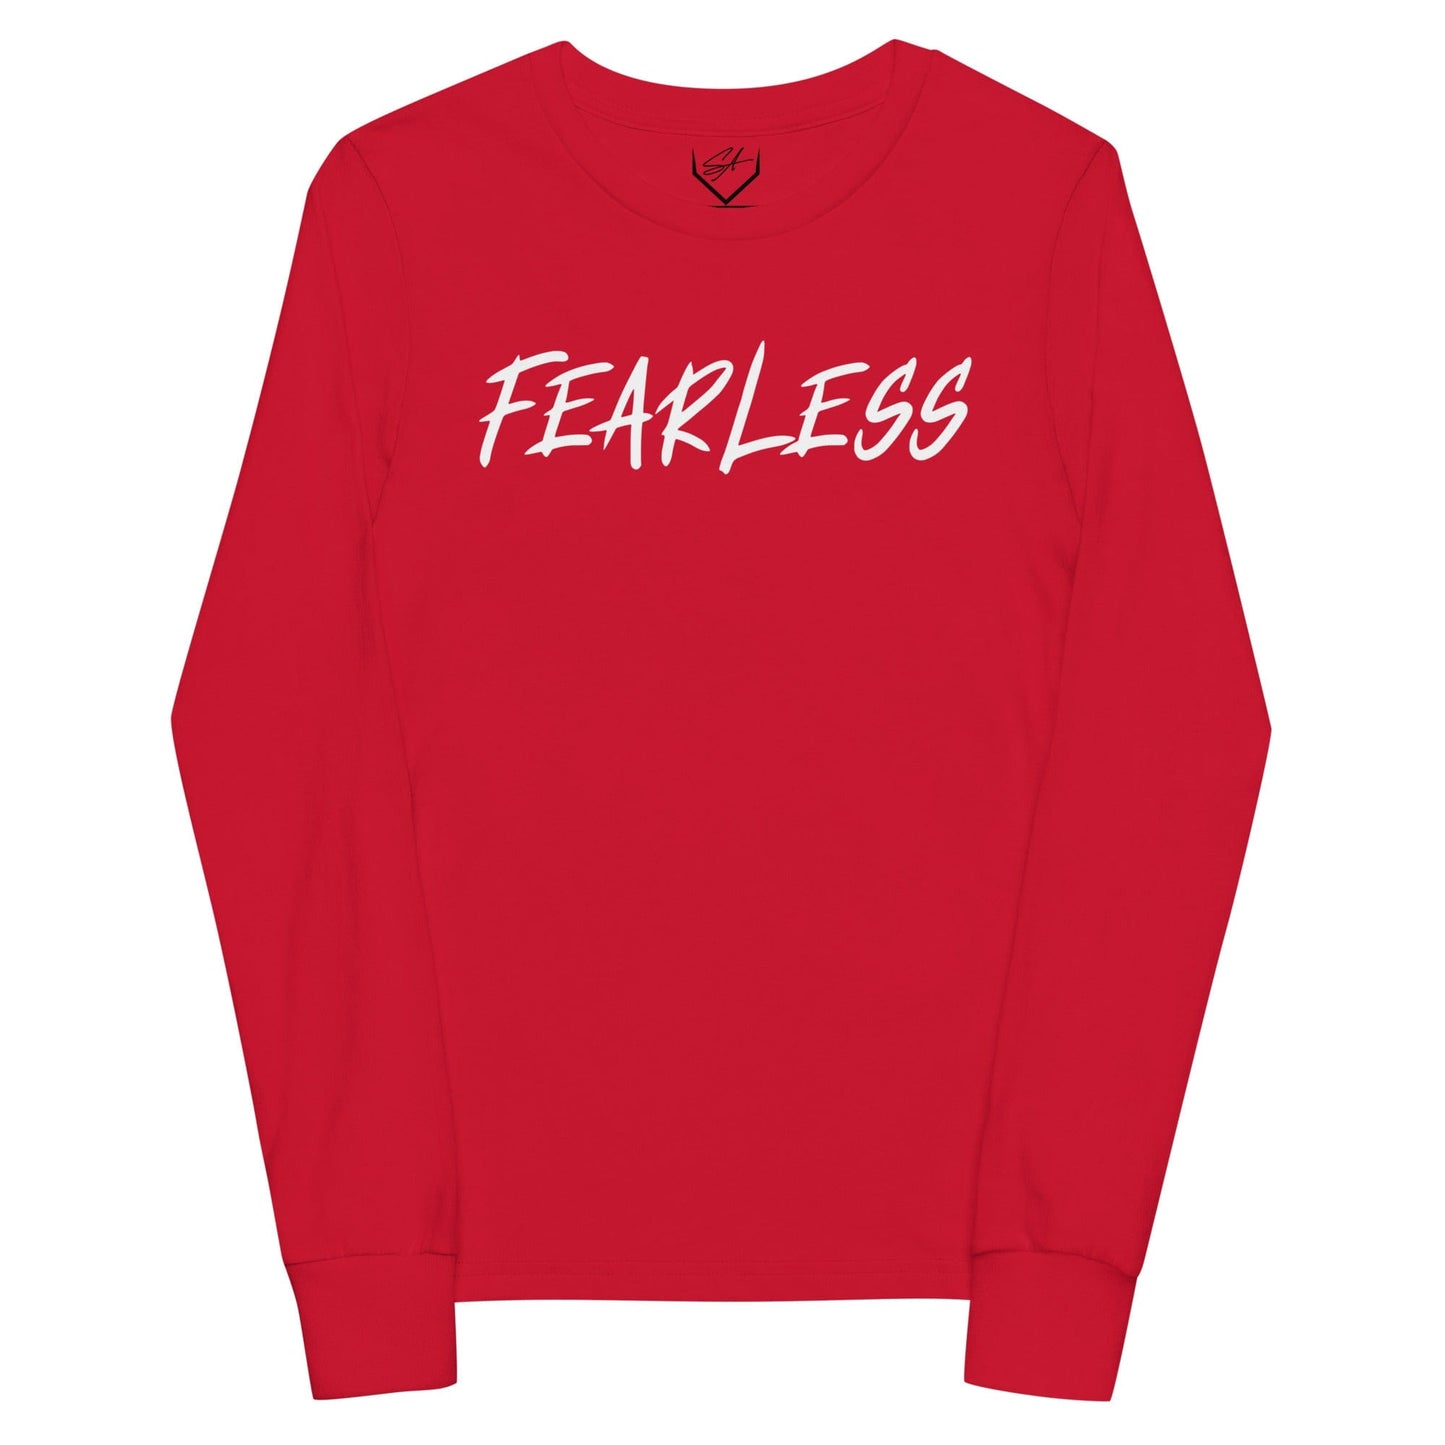 Fearless - Youth Long Sleeve